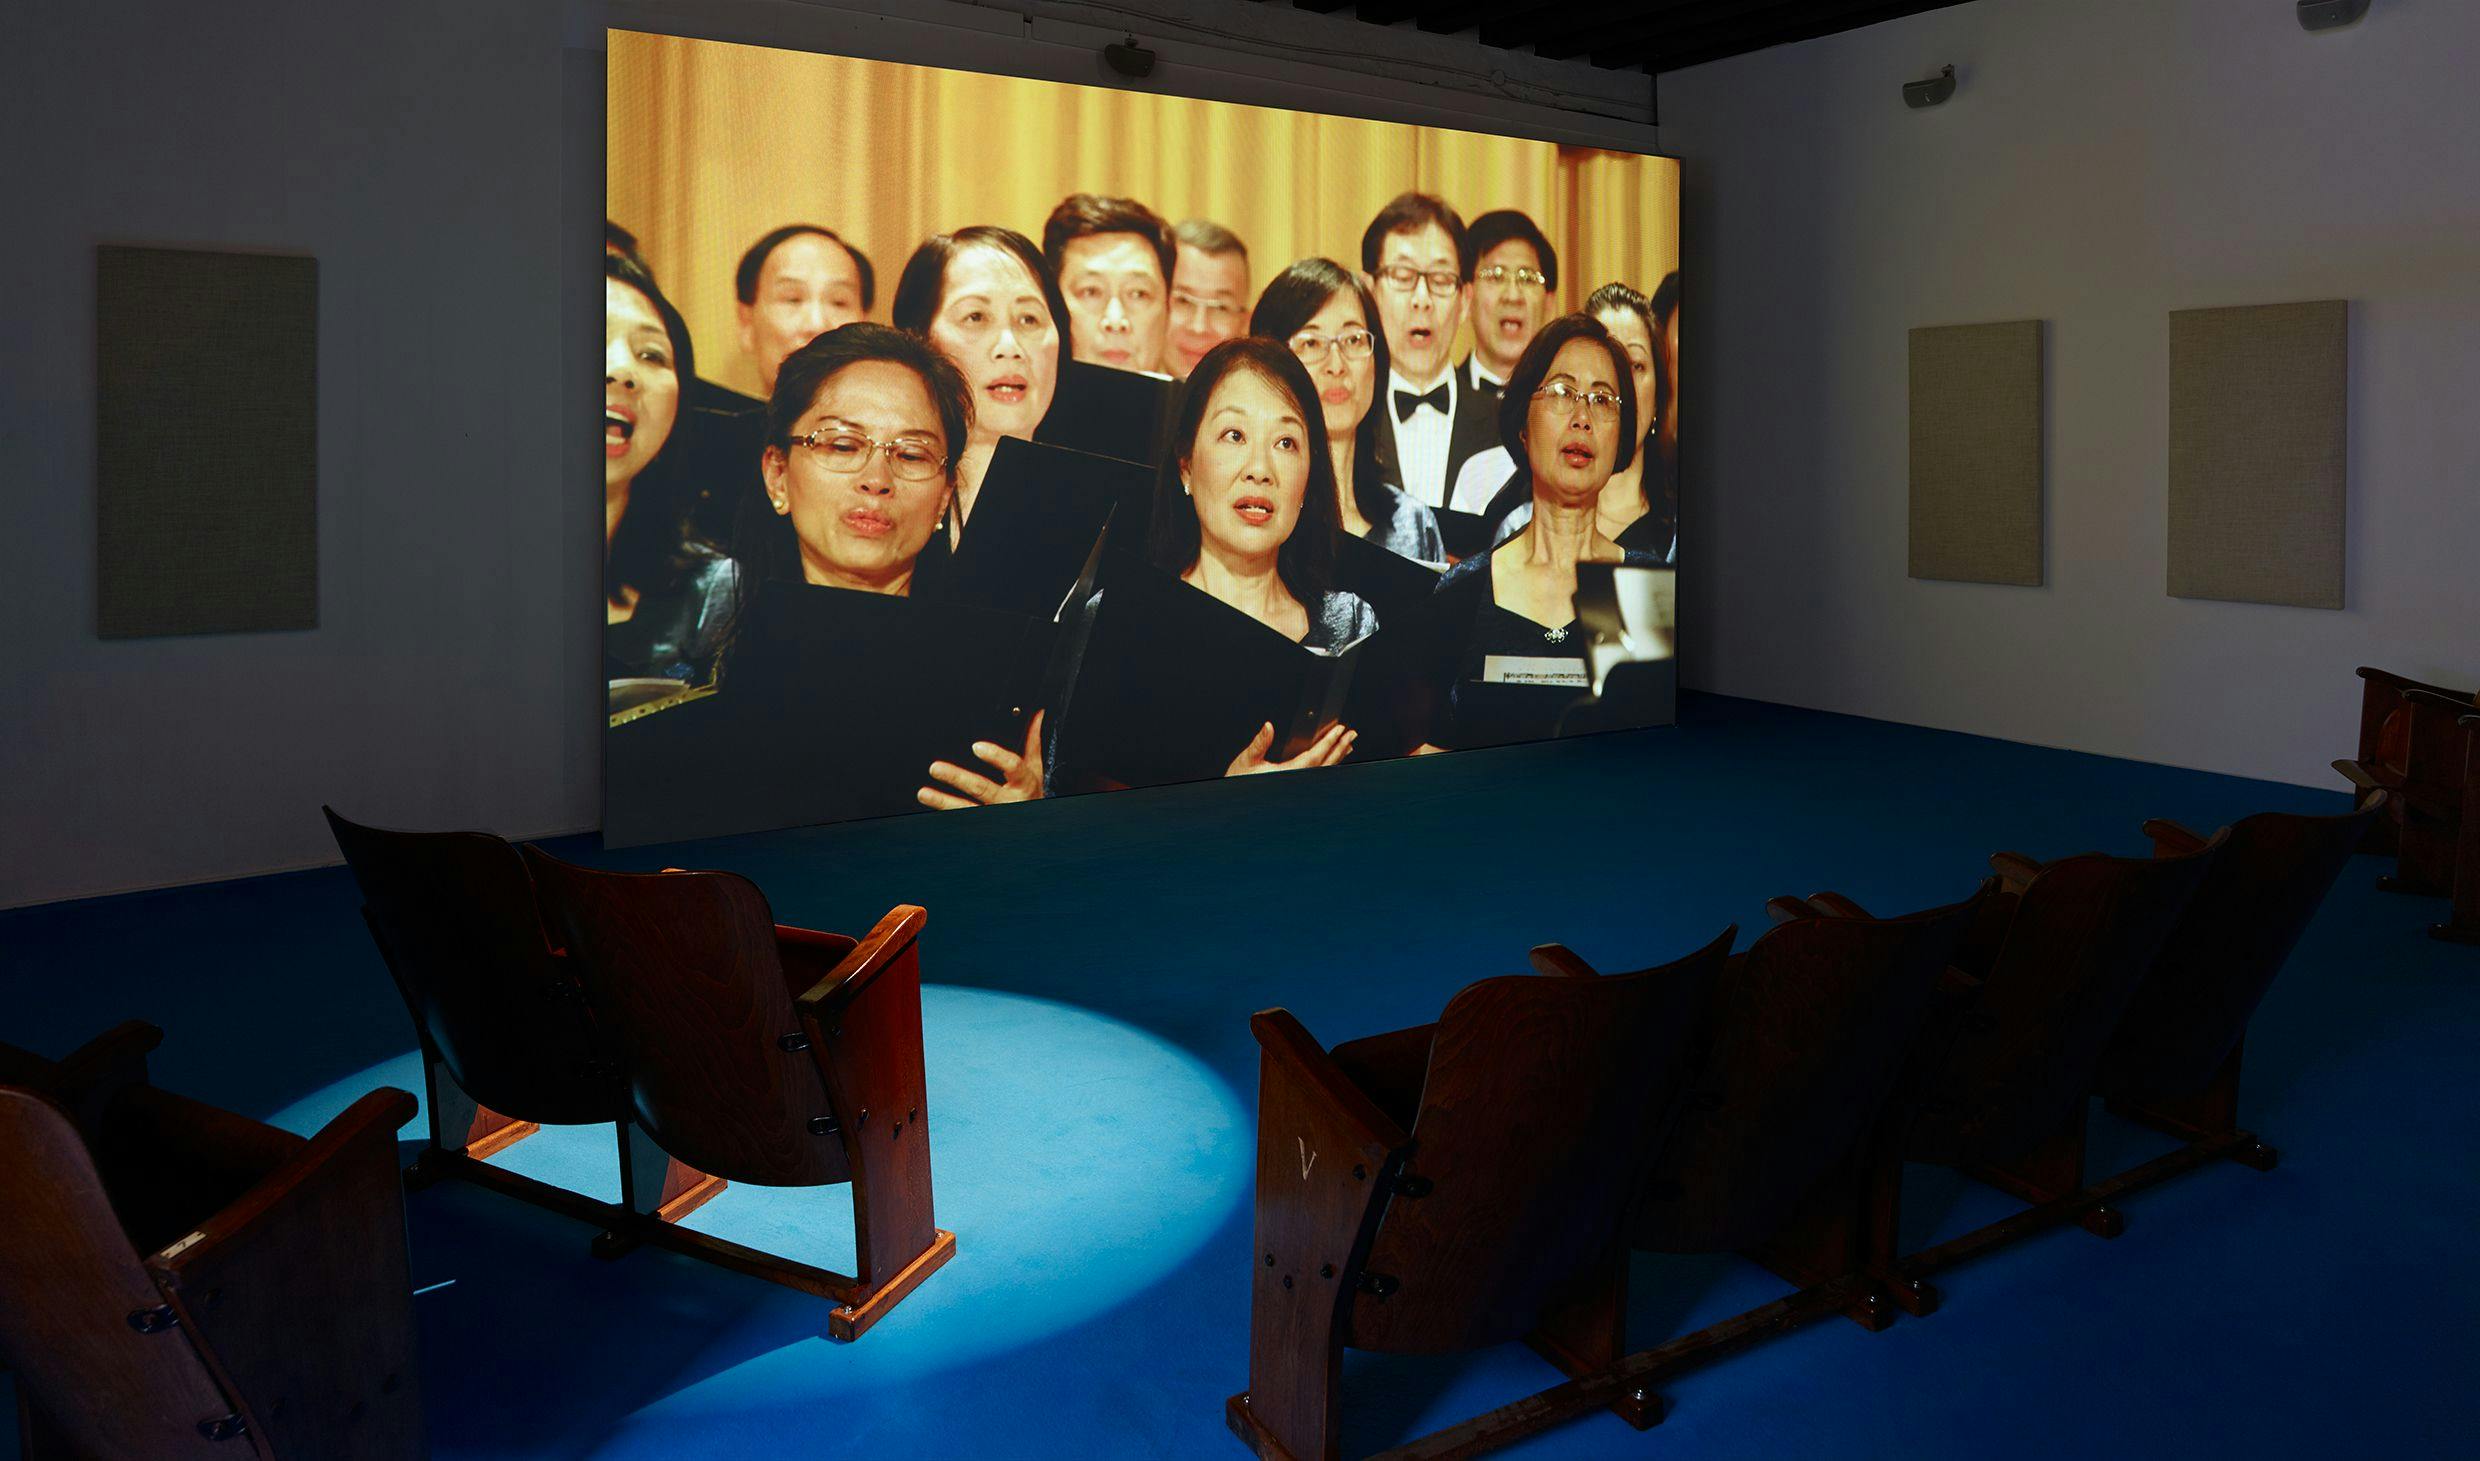 Installation view, Samson Young, We are the World, as performed by the Hong Kong Federation of Trade Unions Choir (Muted Situation #21) from Songs for Disaster Relief, Hong Kong Pavilion, 3 May - 26 November 2017, 57th Venice Biennale, Venice. We can see the work projected on the wall, beige sound panels and wooden church pews for the audience to sit on. The floor is covered in blue carpet.